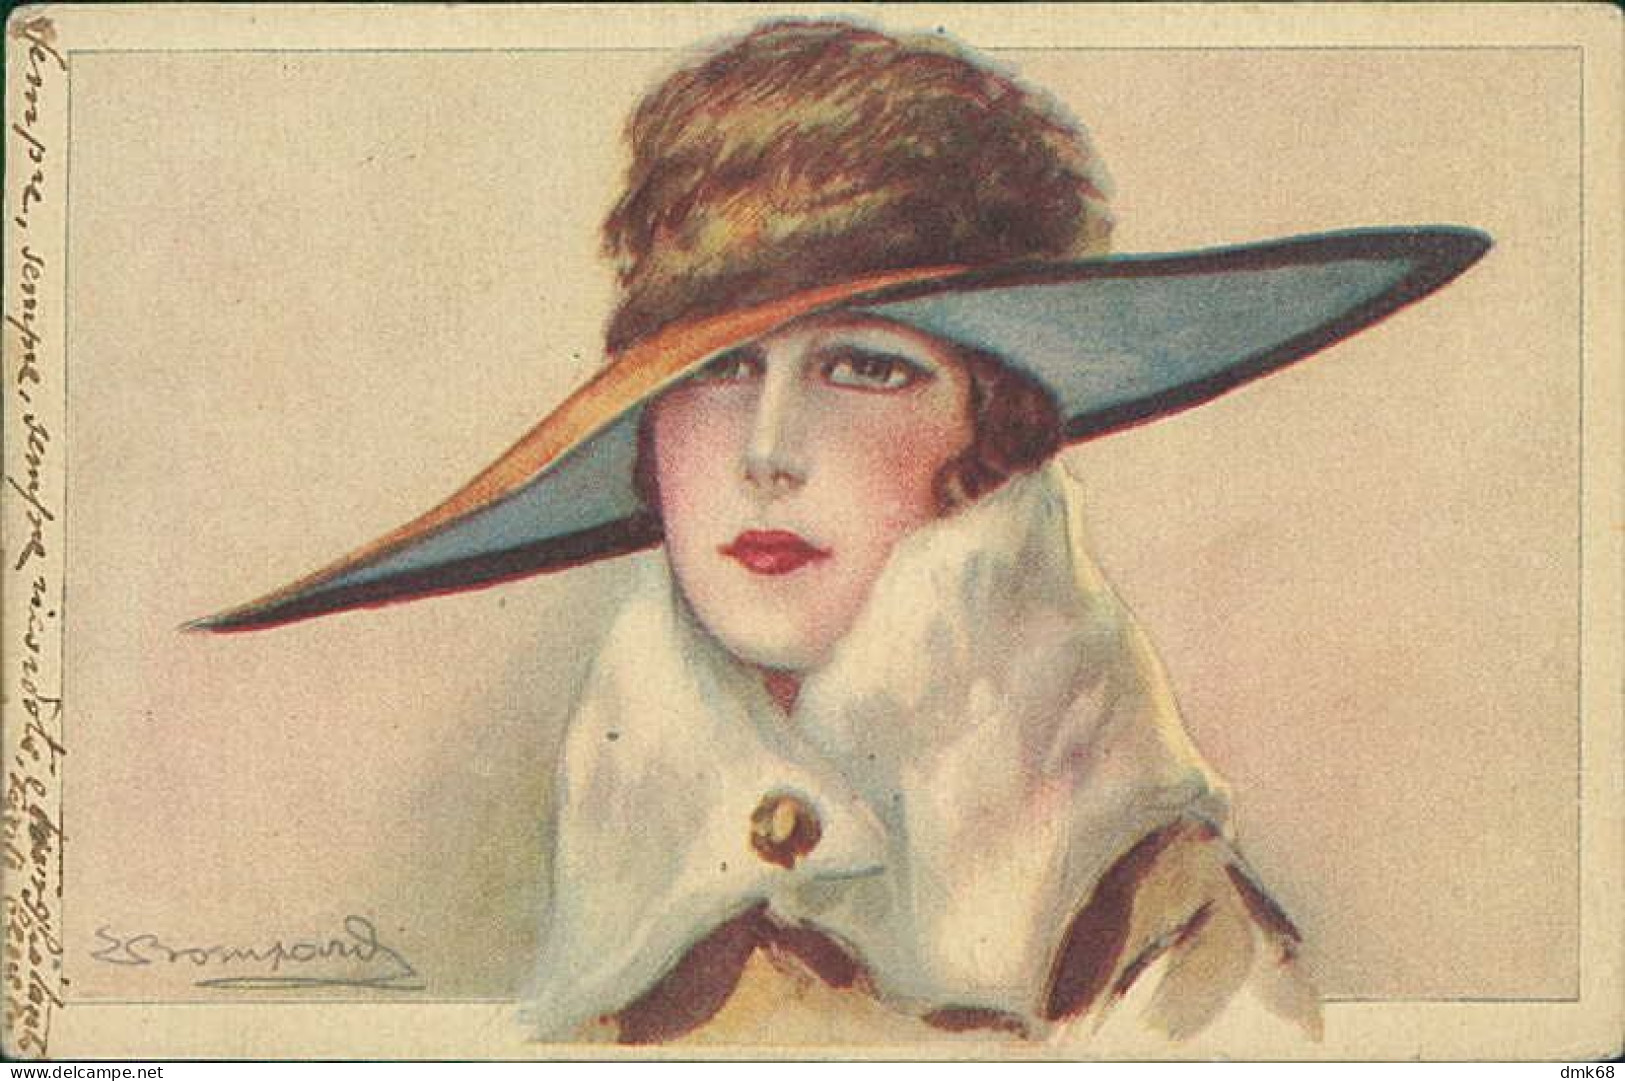 BOMPARD  SIGNED 1910s POSTCARD - WOMAN WITH BIG HAT - N.990/2 (5501) - Bompard, S.